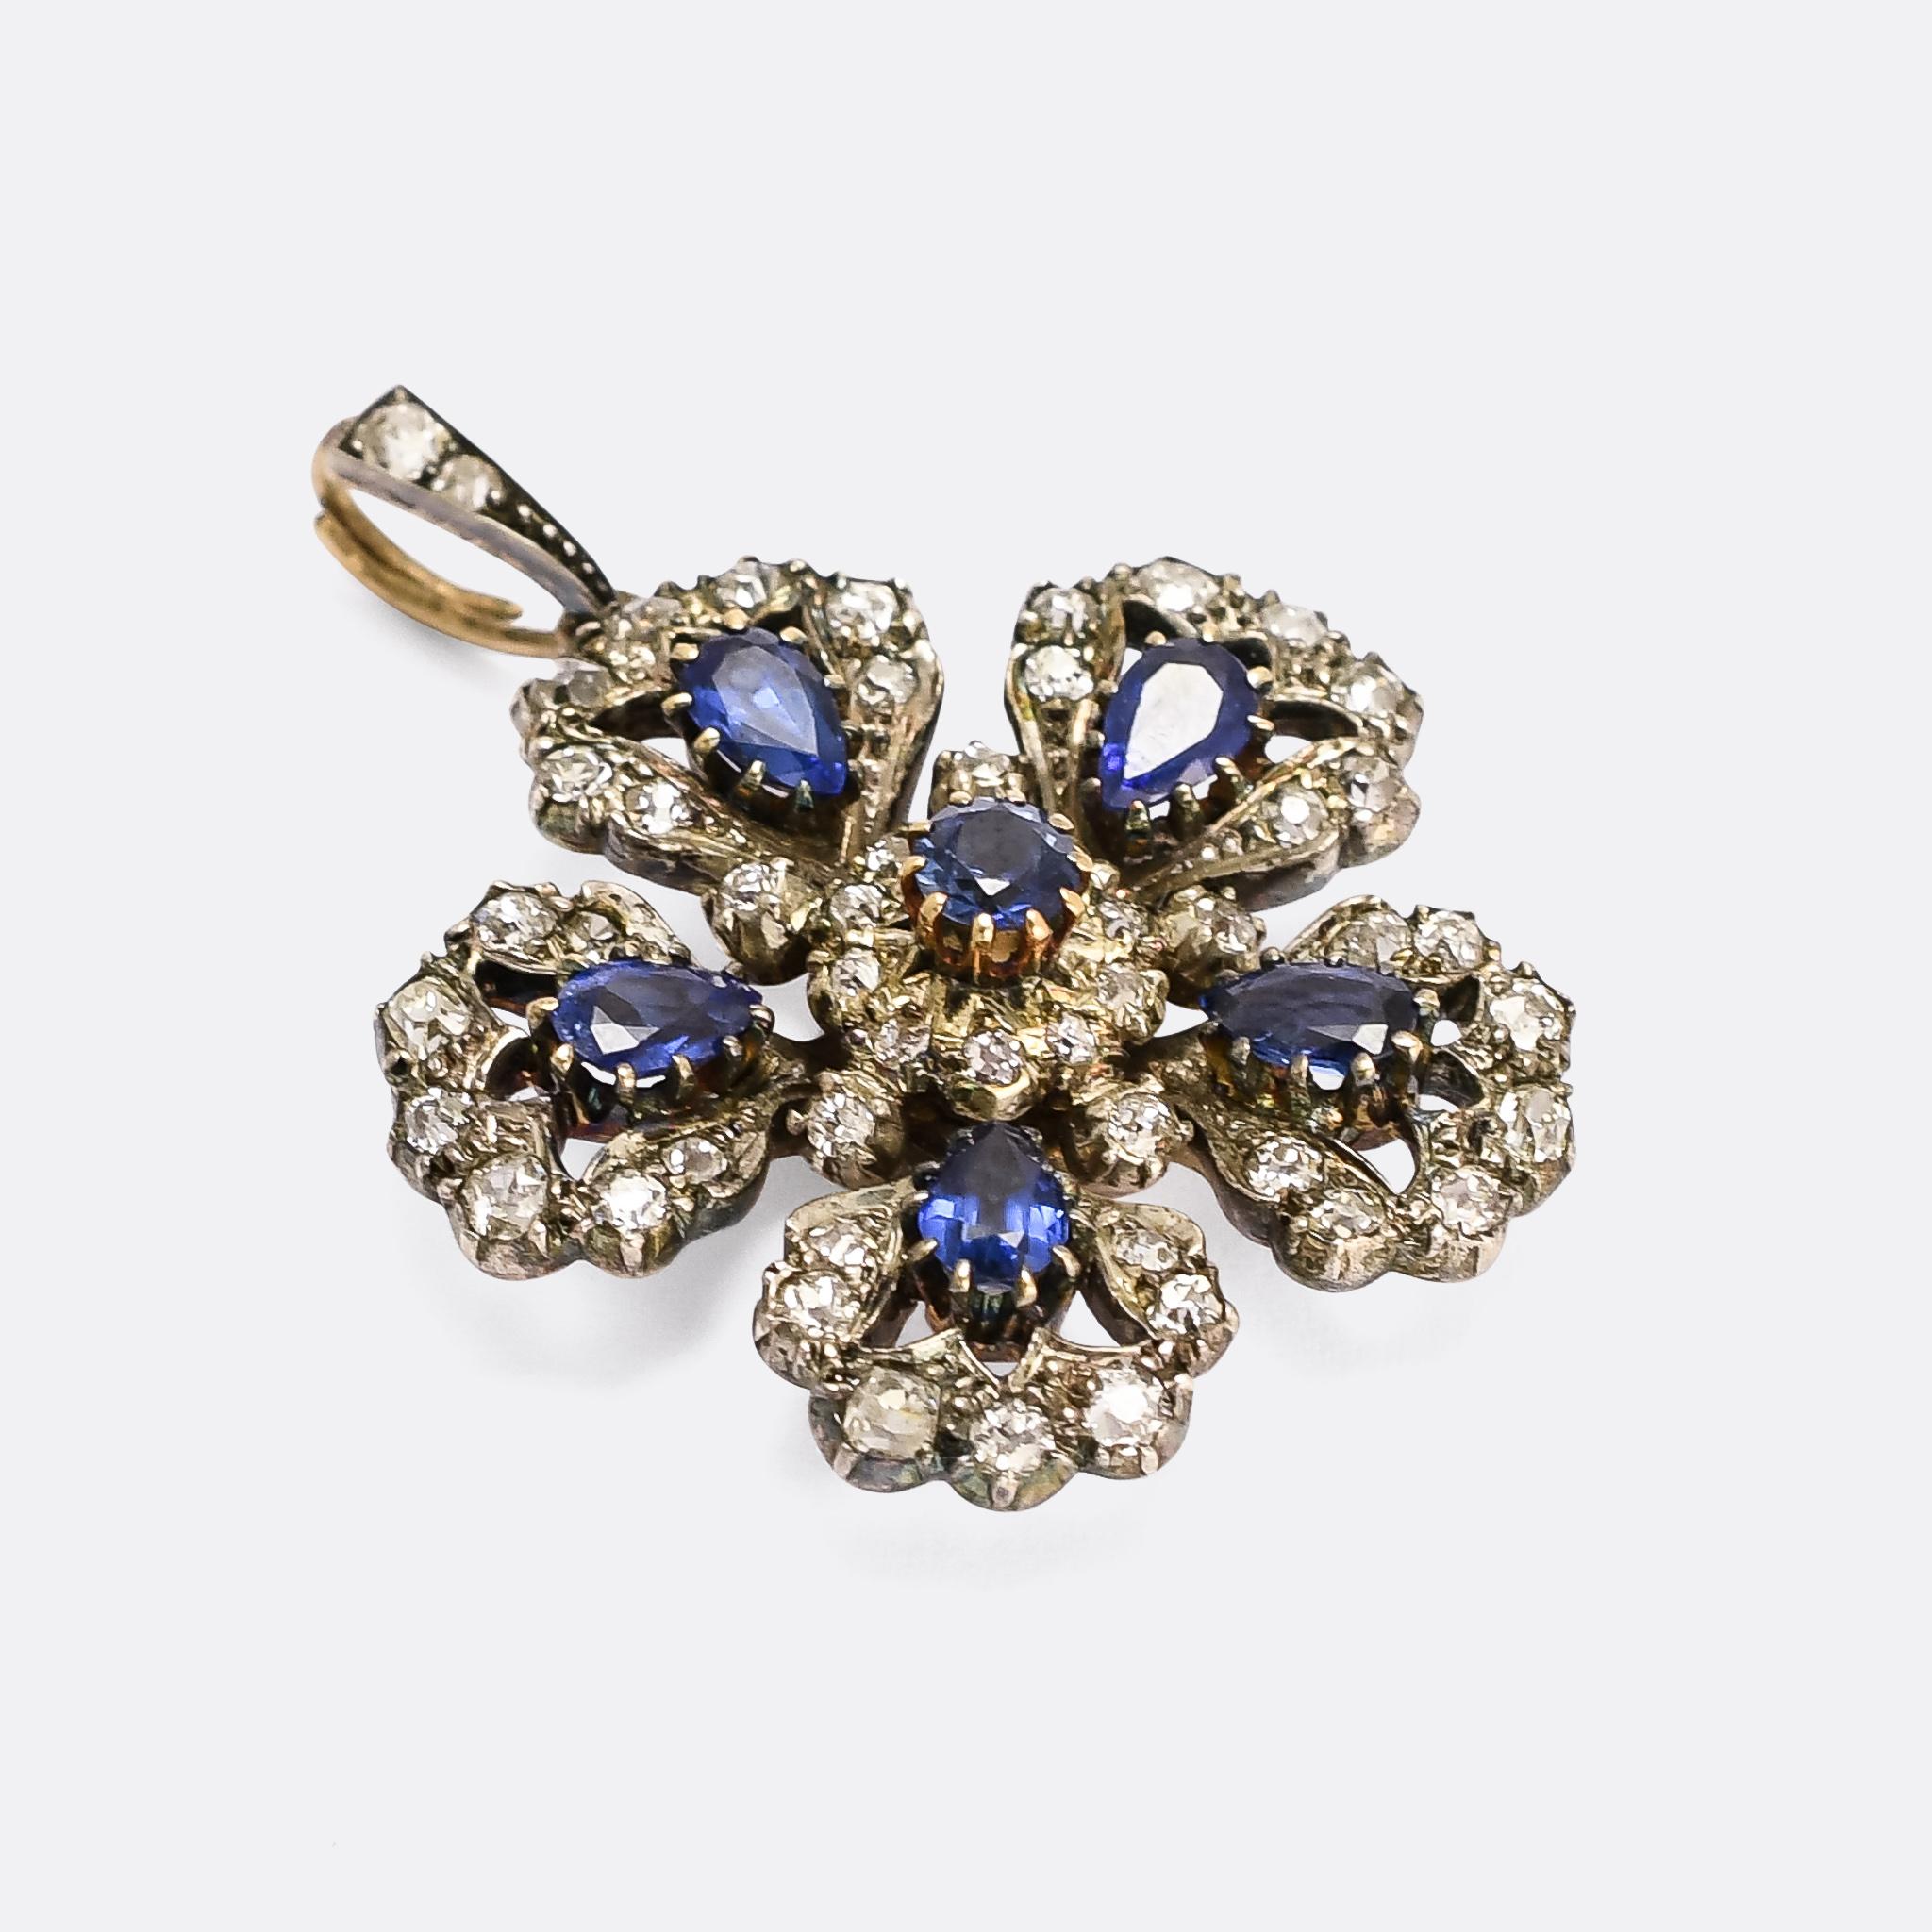 A stunning mid Victorian flower pendant set with vibrant blue sapphires and old mine cut diamonds. It's beautifully constructed, crafted in 15k gold with silver settings, and complete with original diamond-set bail. It was made in England in the